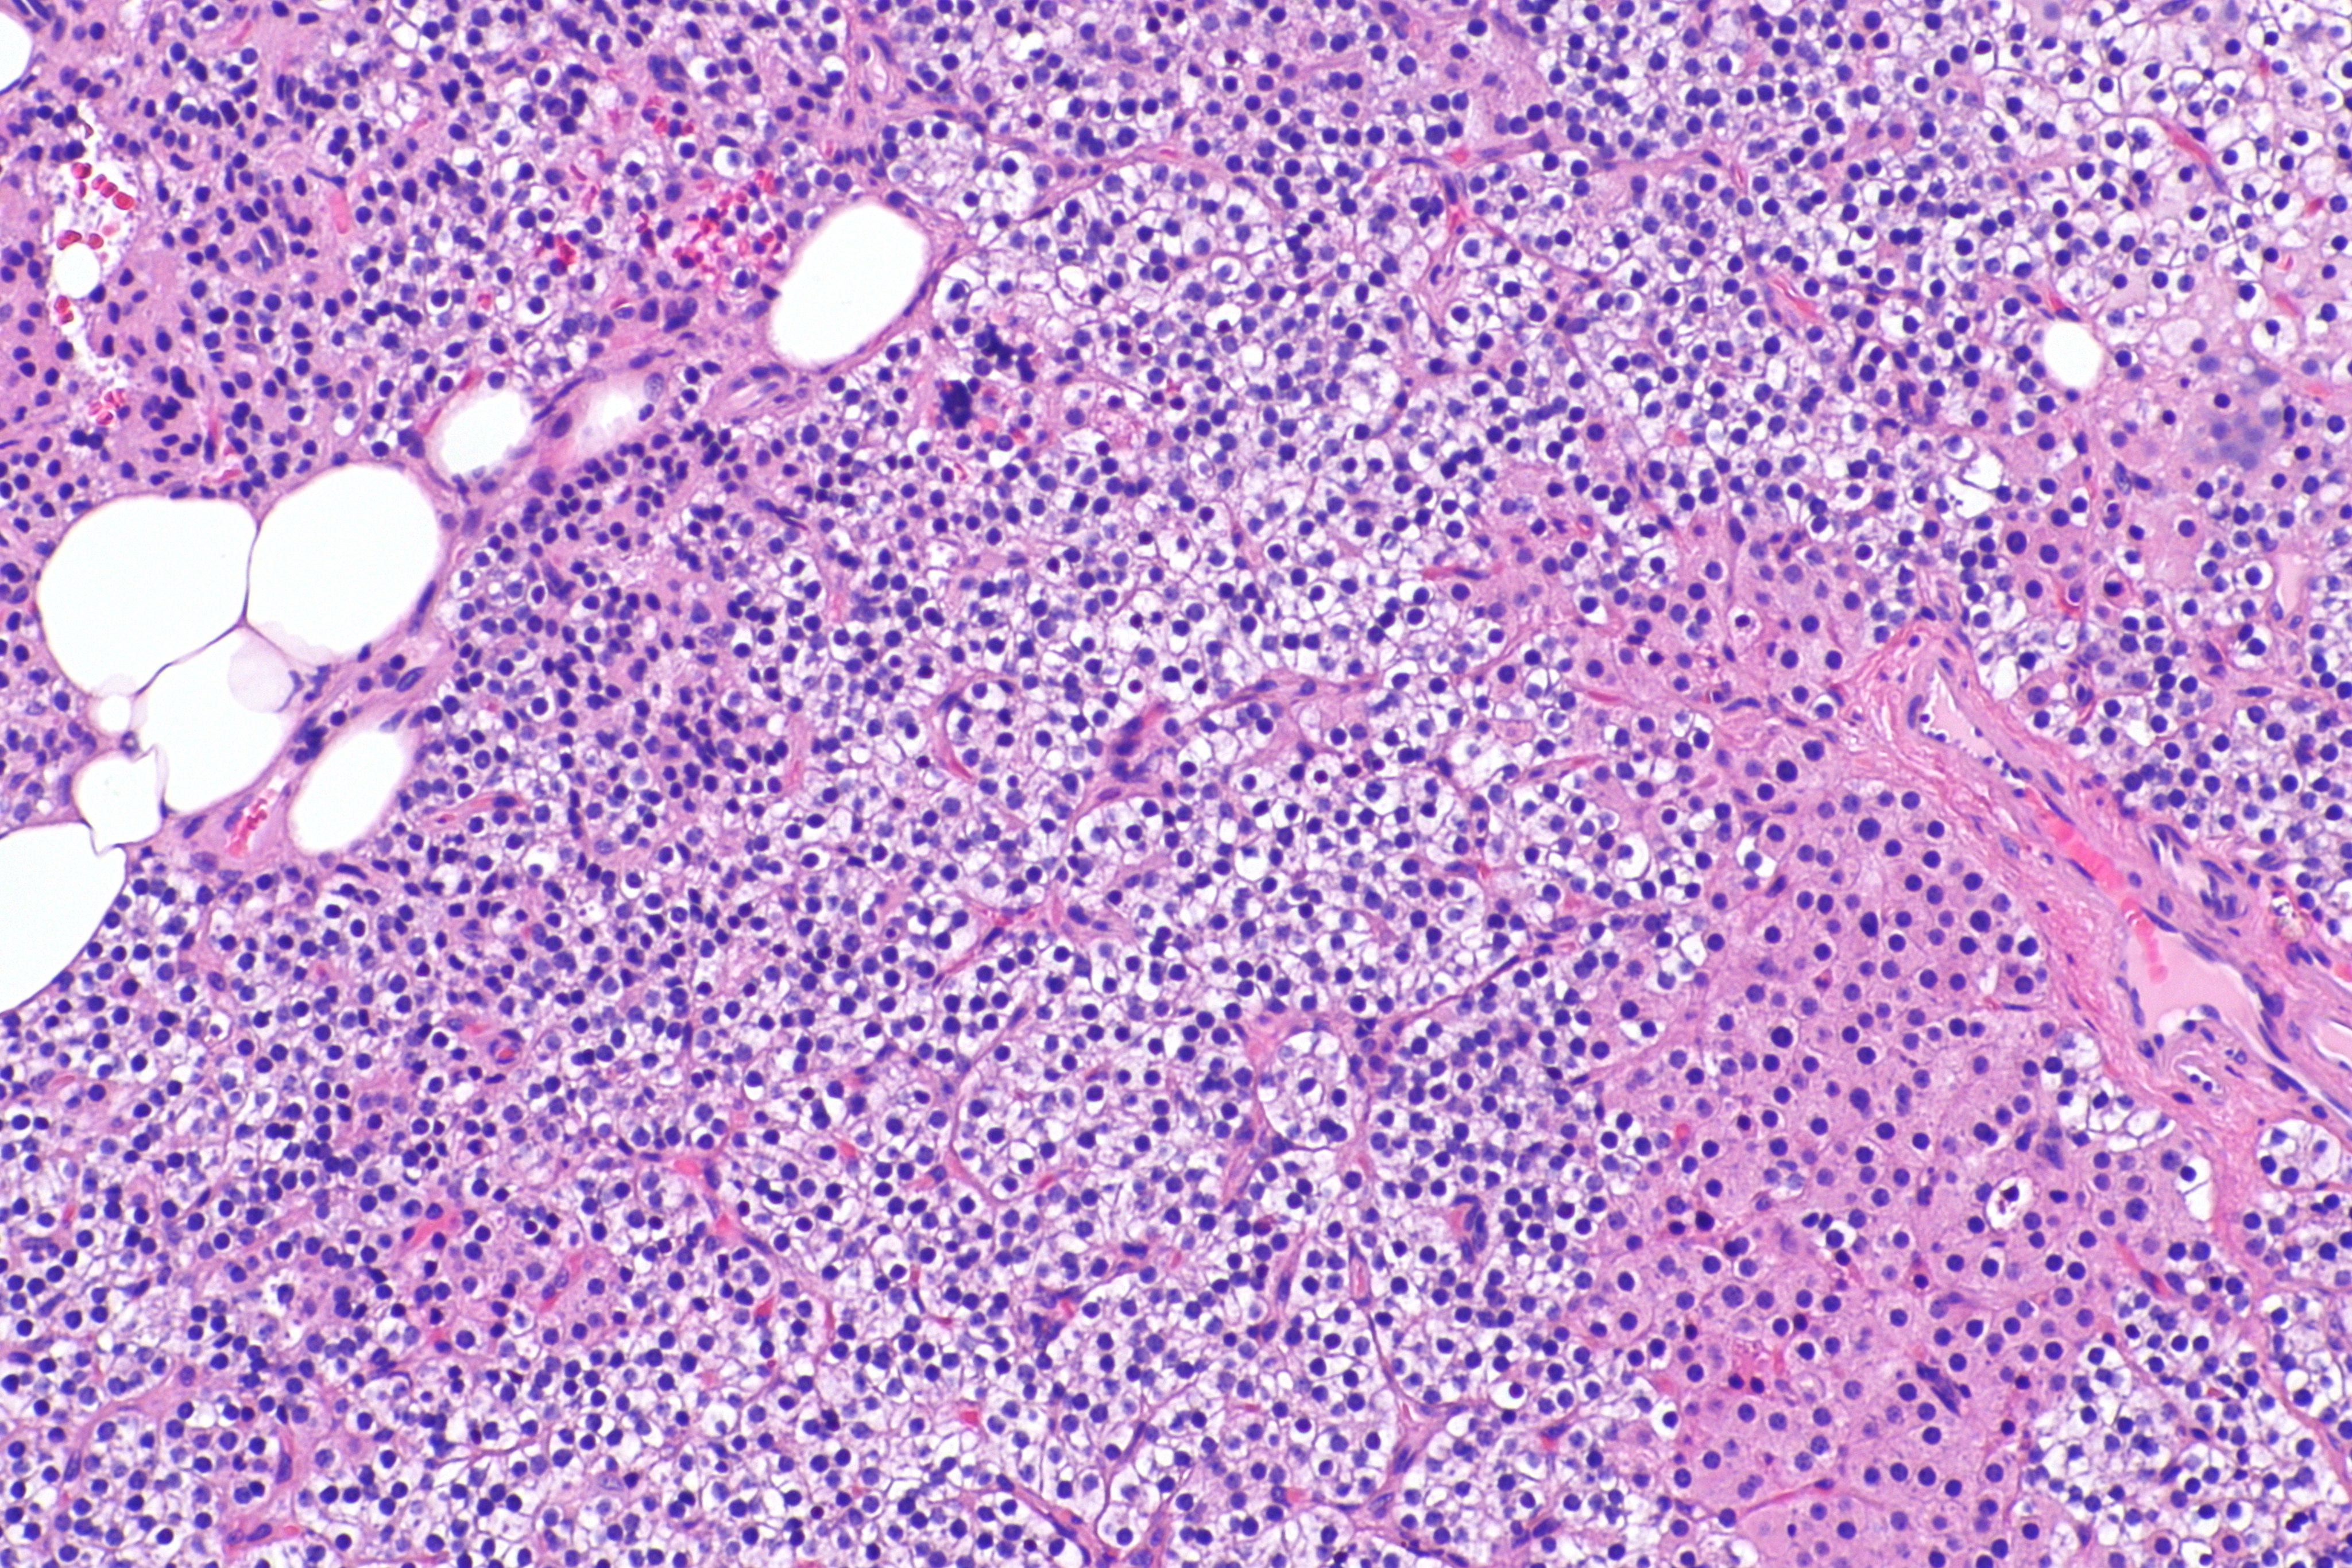 Micrograph showing a parathyroid hyperplasia (H&E stain) on intermediate magnification.Parathyroid adenoma is a clinicopathologic diagnosis. The histology is nonspecific. -Source: Wikimedia commons